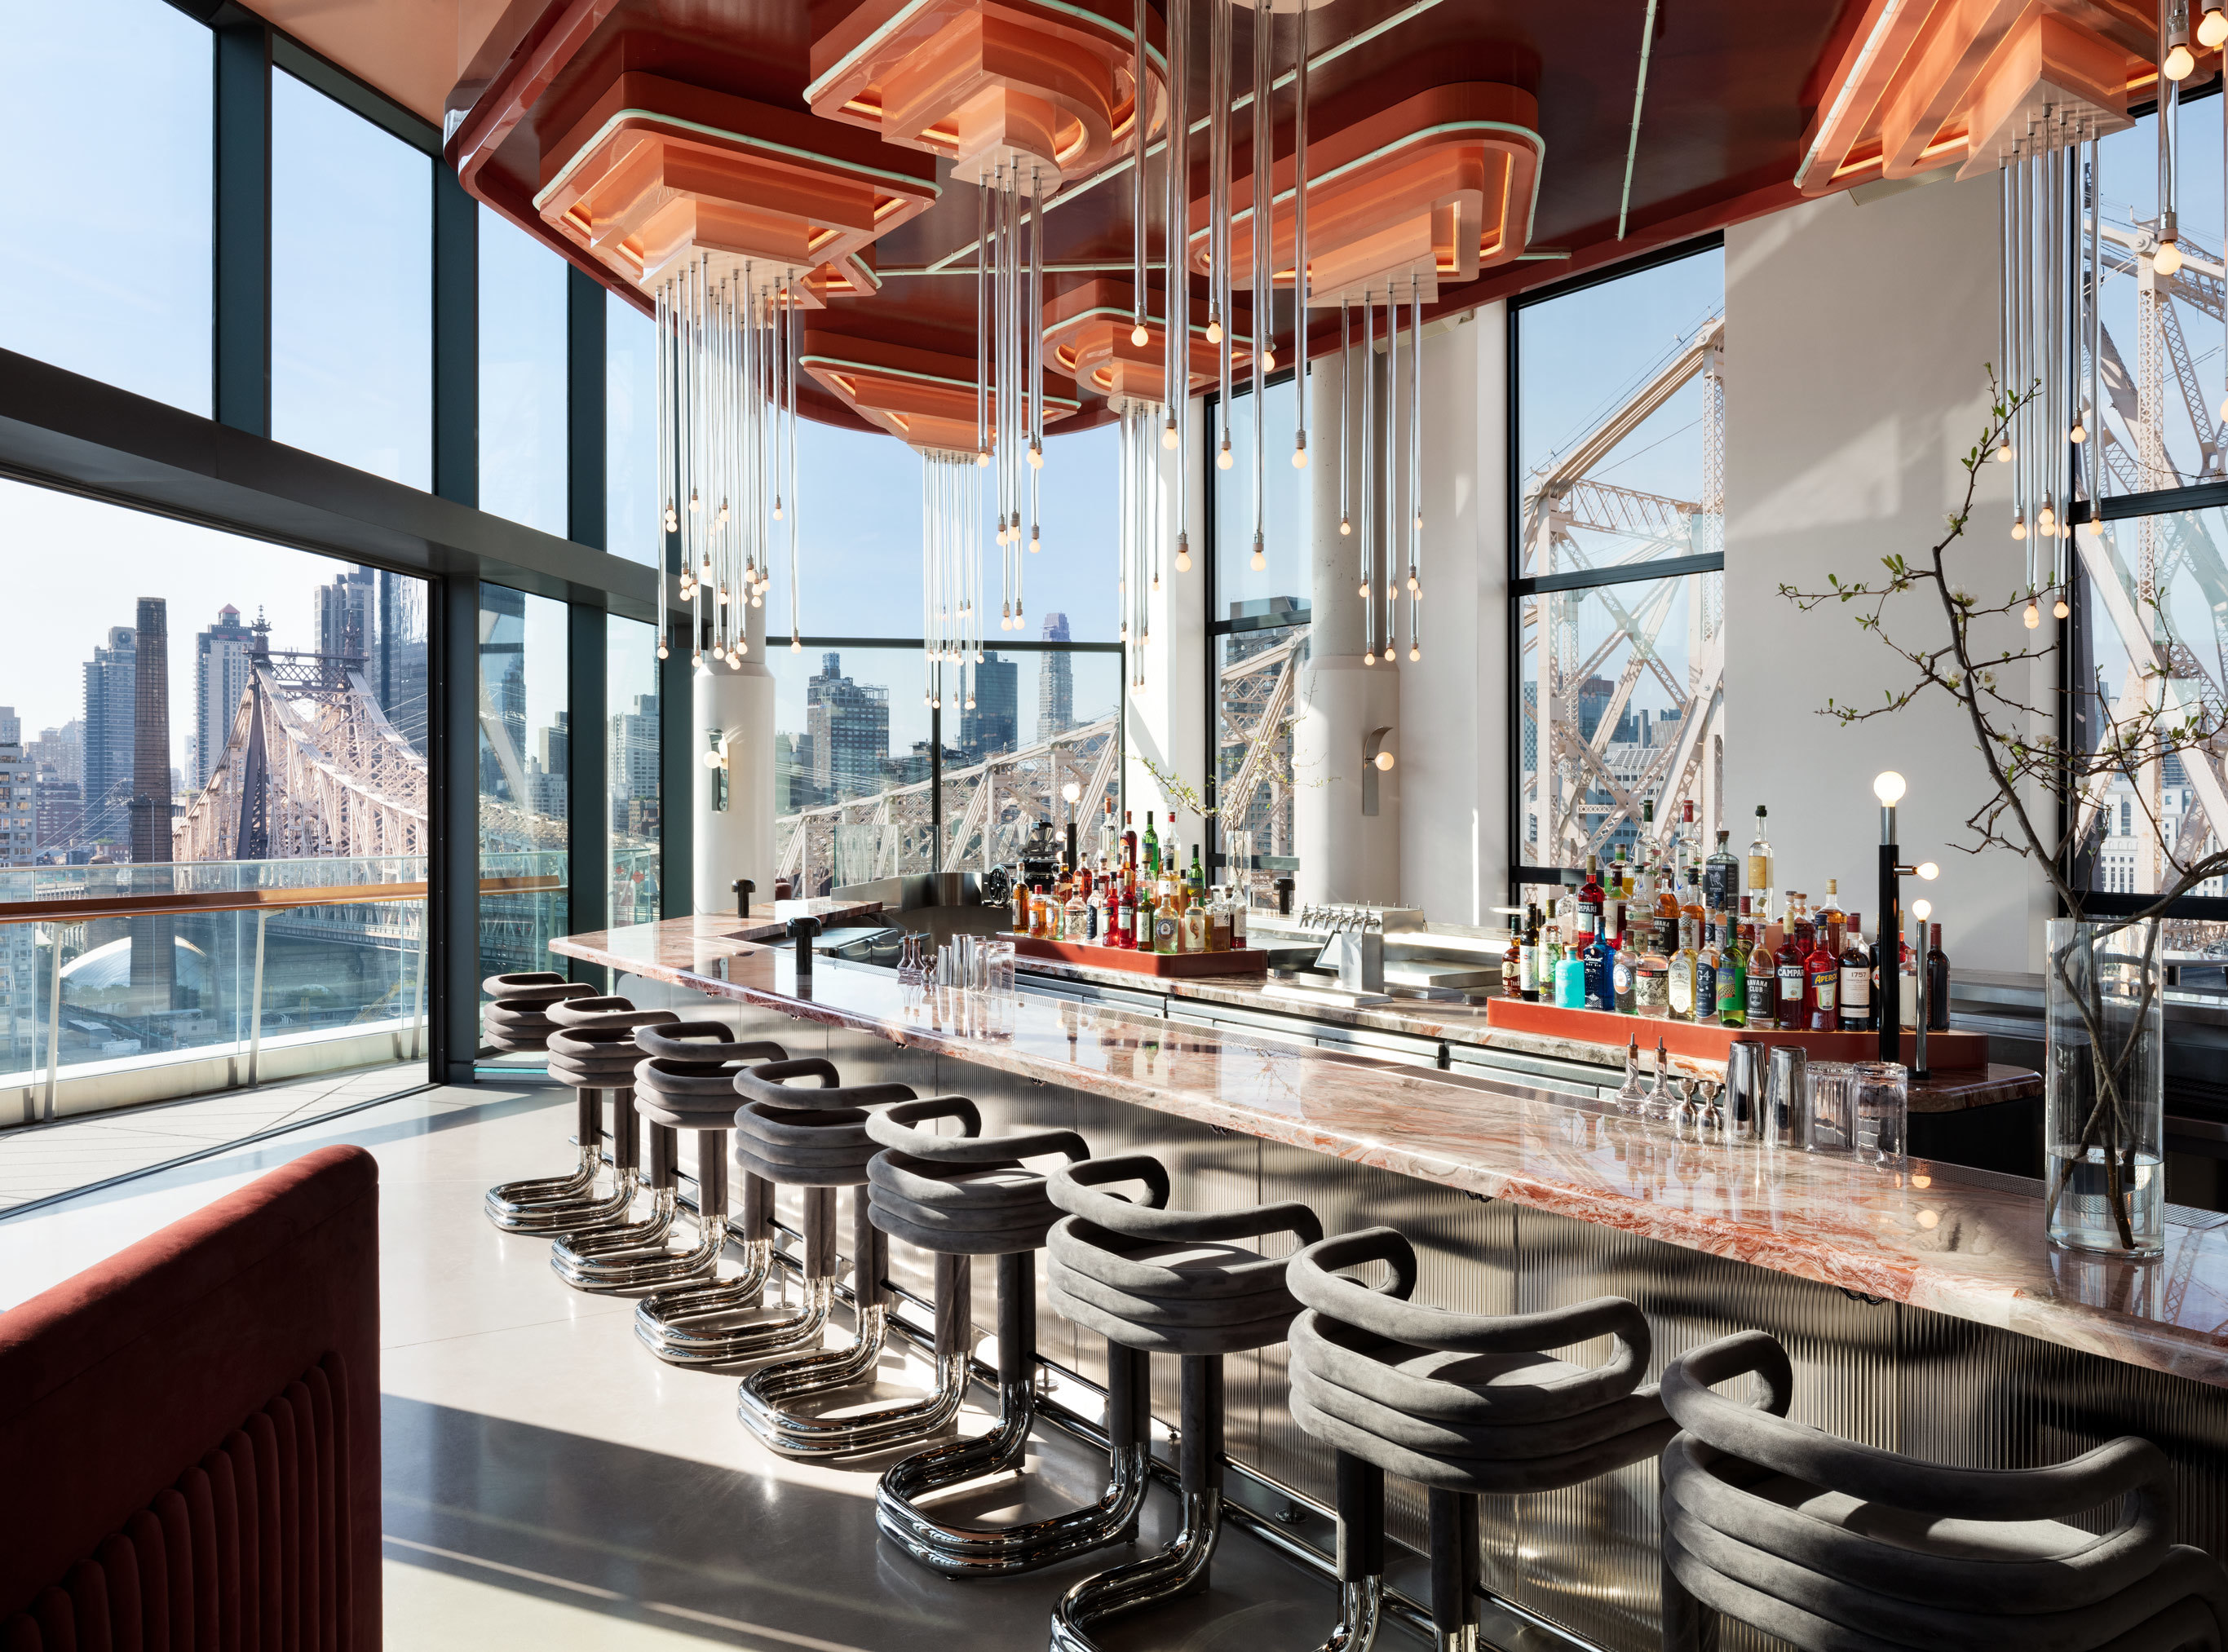 Roosevelt Island’s rooftop bar Panorama Area has sweeping sights of NYC